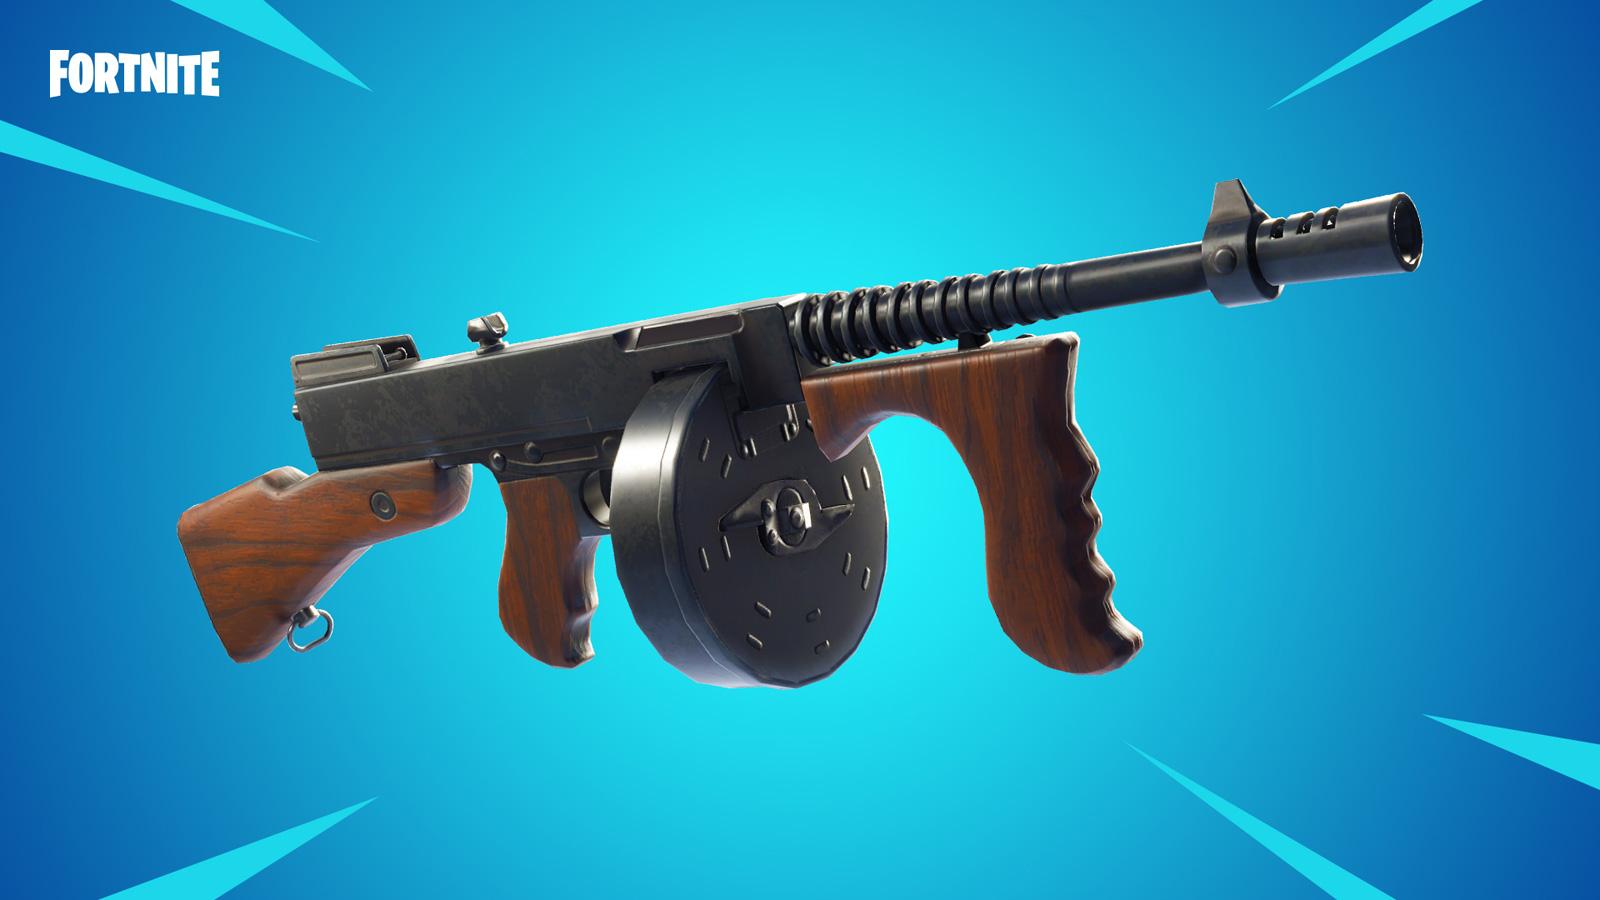 fortnite battle royale drum gun banned for being too powerful - fortnite vaulted items vote